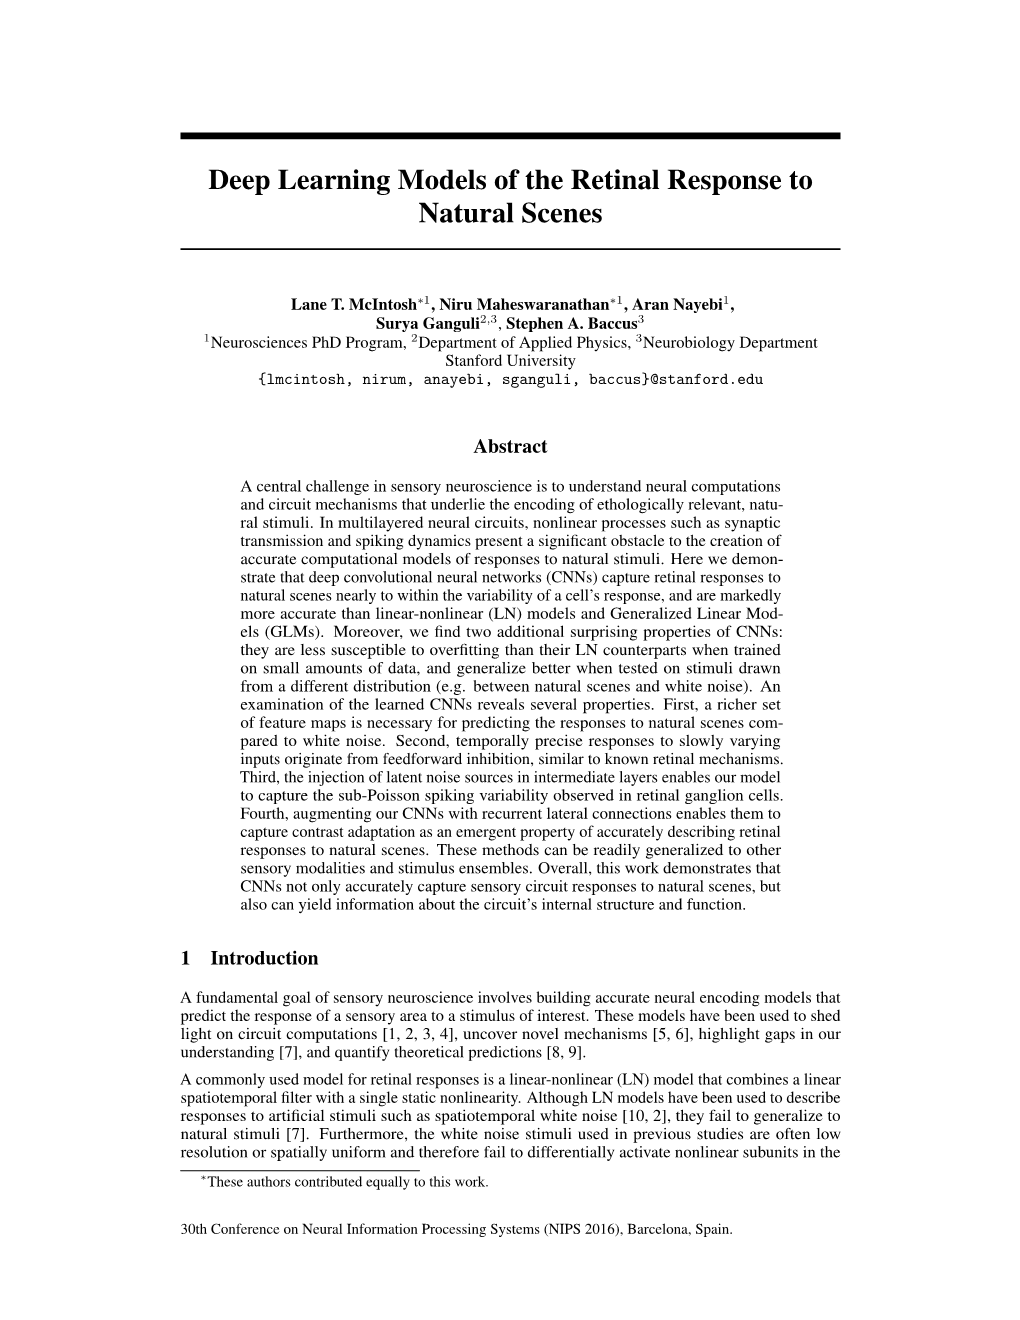 Deep Learning Models of the Retinal Response to Natural Scenes